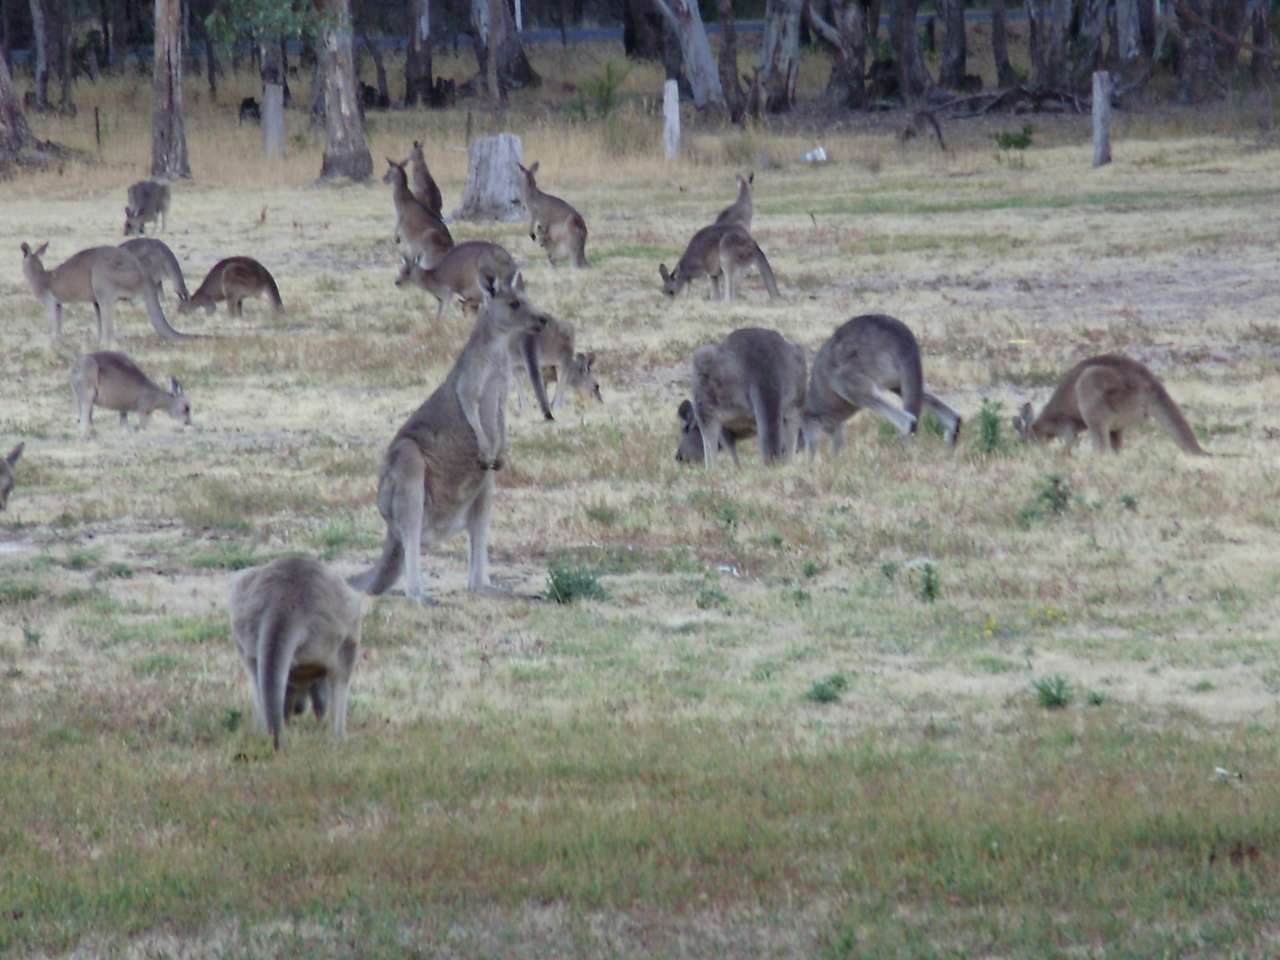 Kangaroos grazing puzzle online from photo